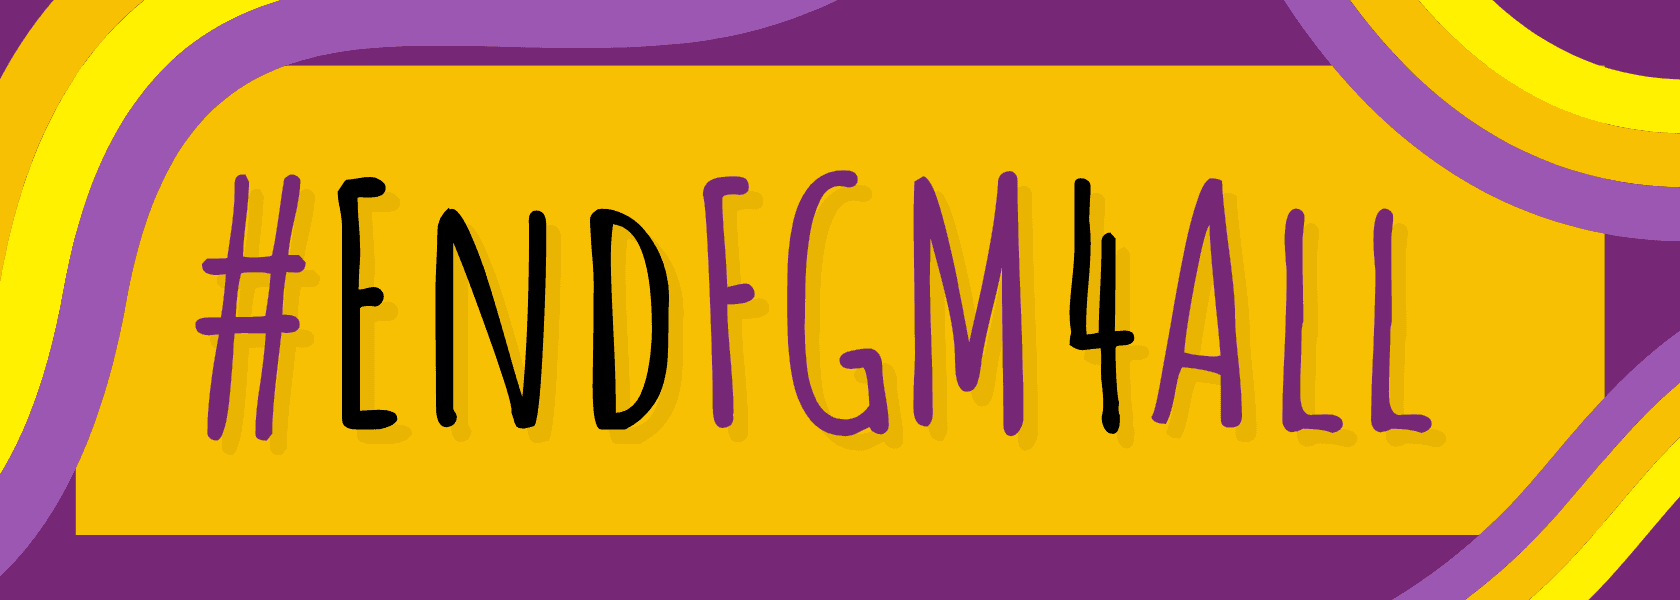 2021 Annual Campaign EndFGM4All